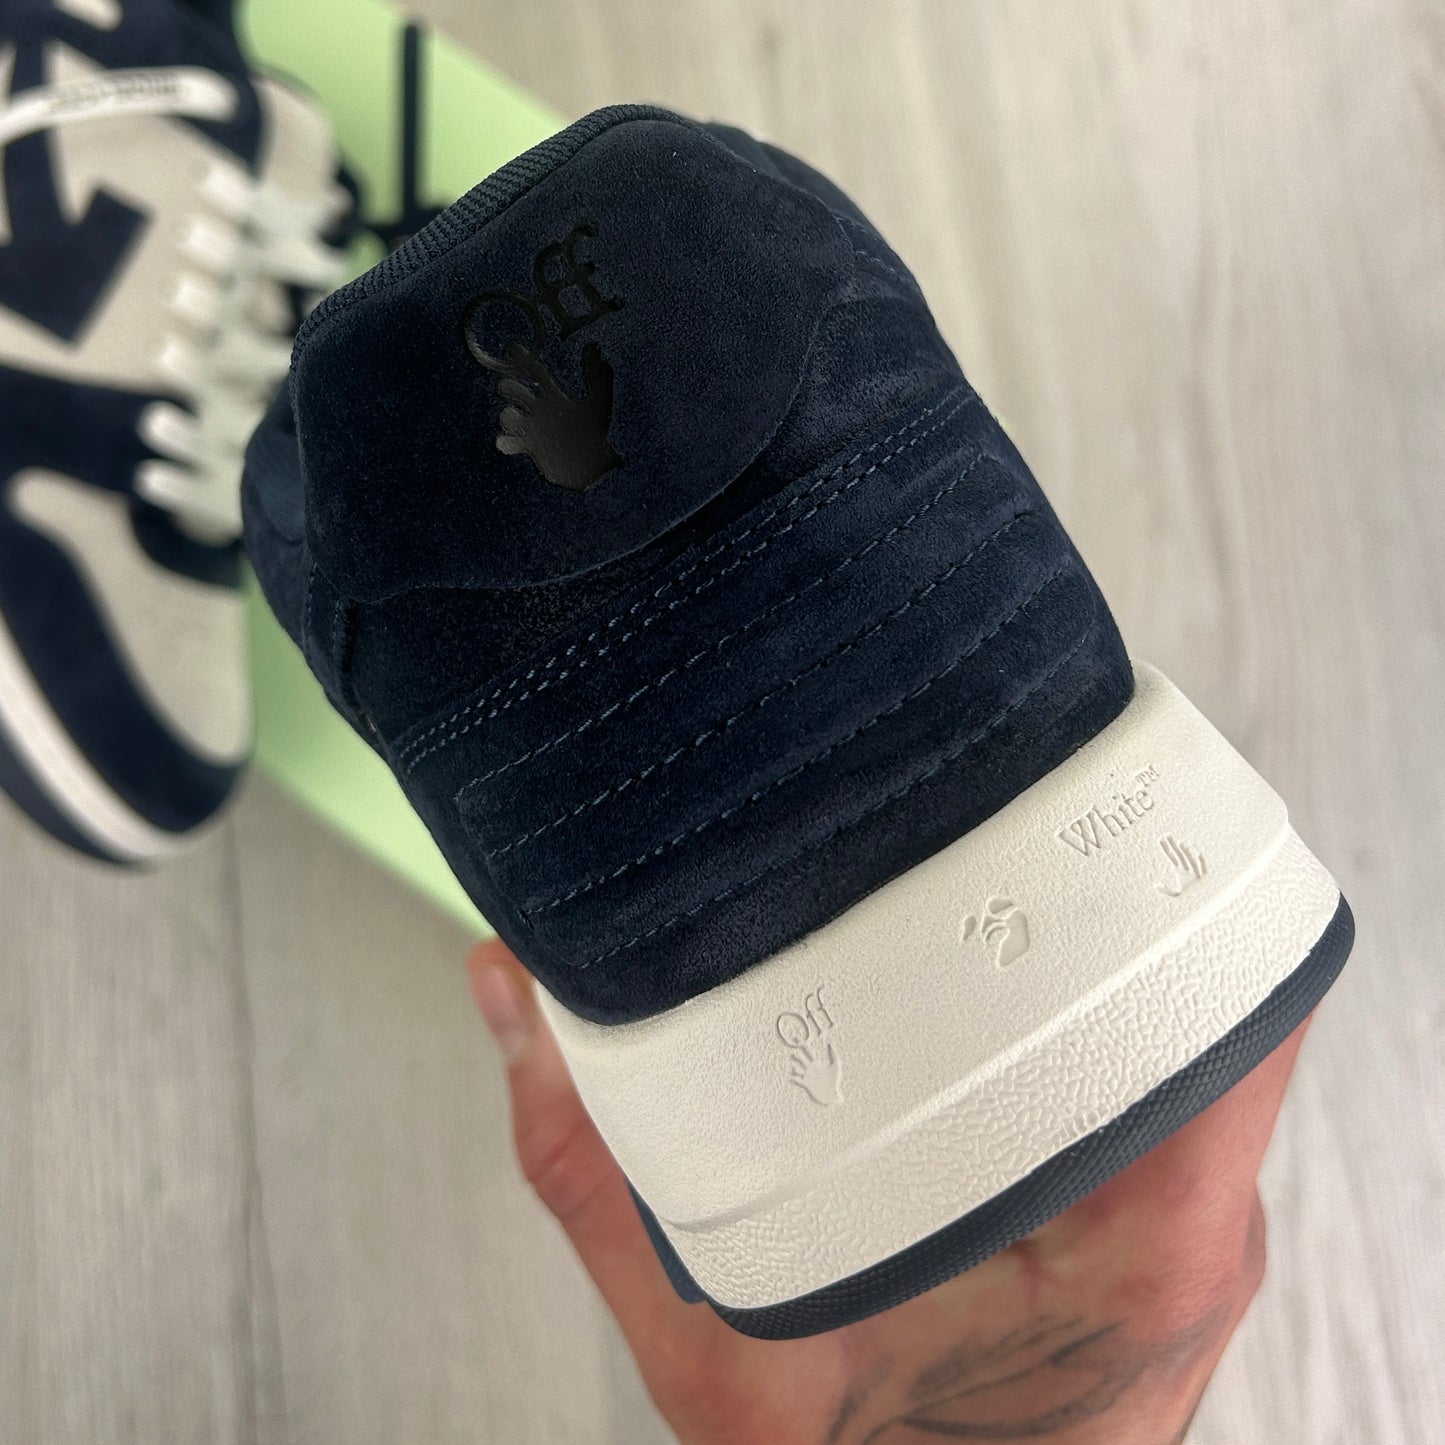 Off-White Men’s Navy Suede & White Low Trainers